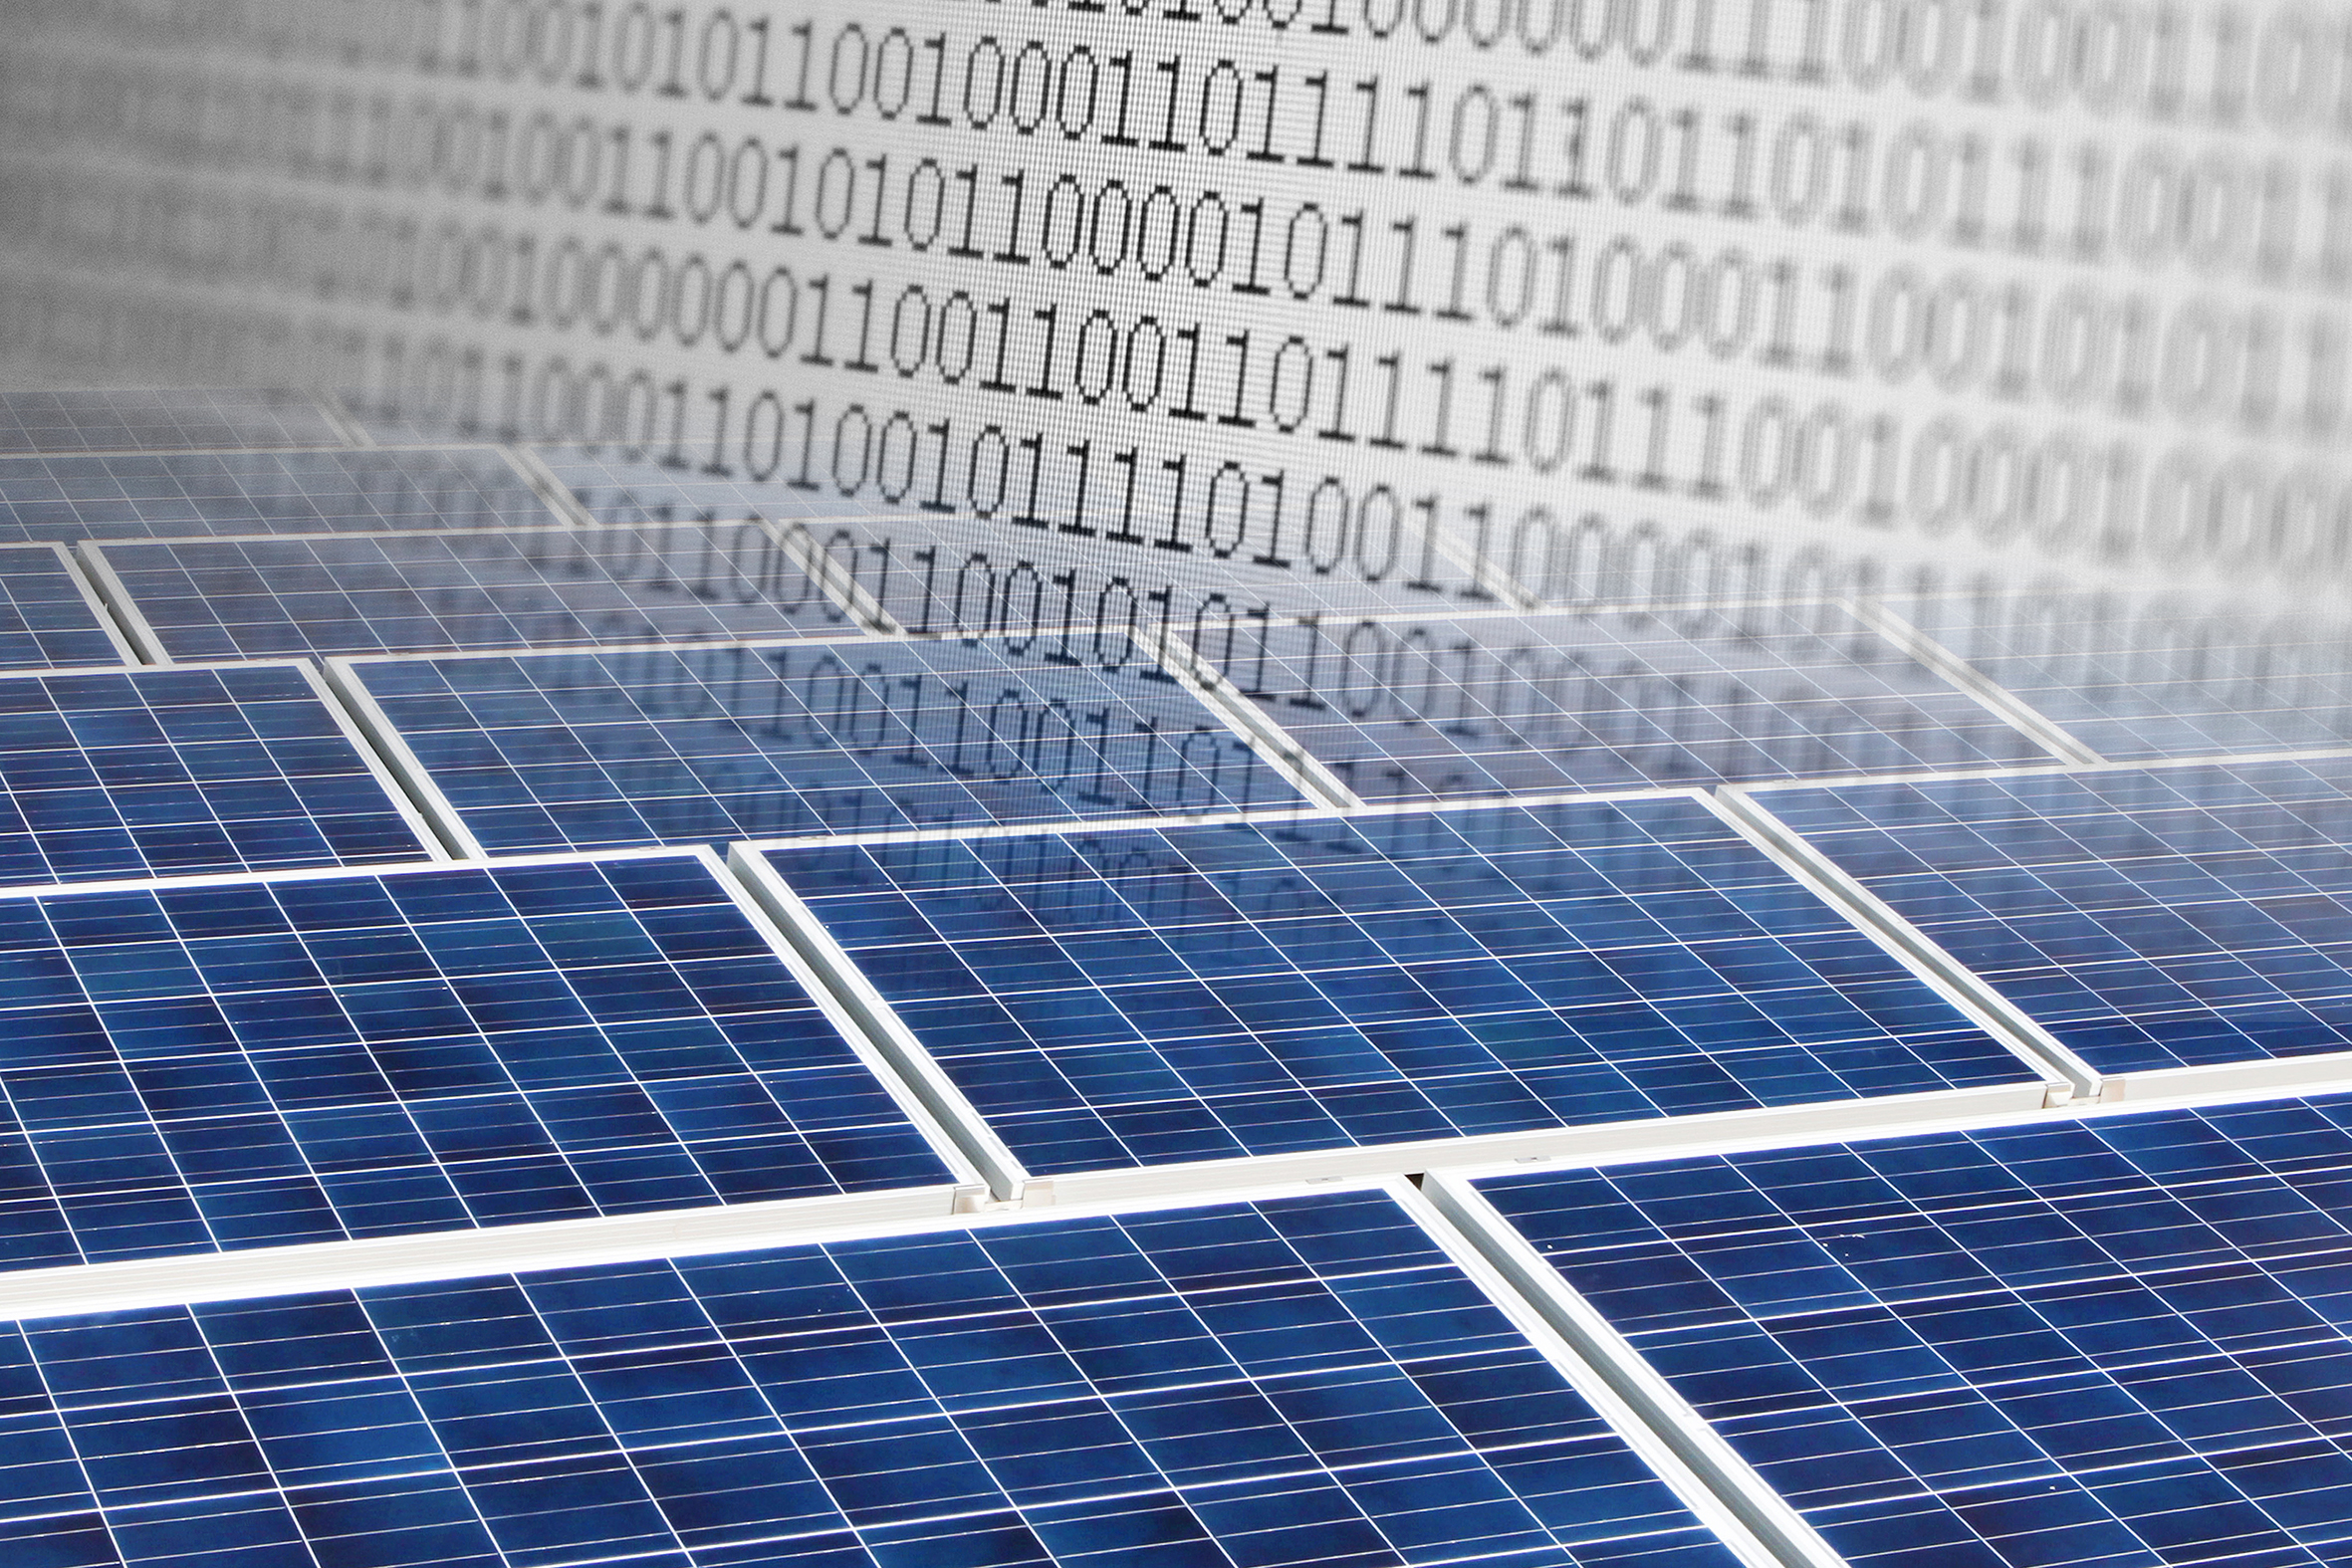 Measure, analyze, optimize - digitization offers numerous new starting points for even better quality control in photovoltaics. 